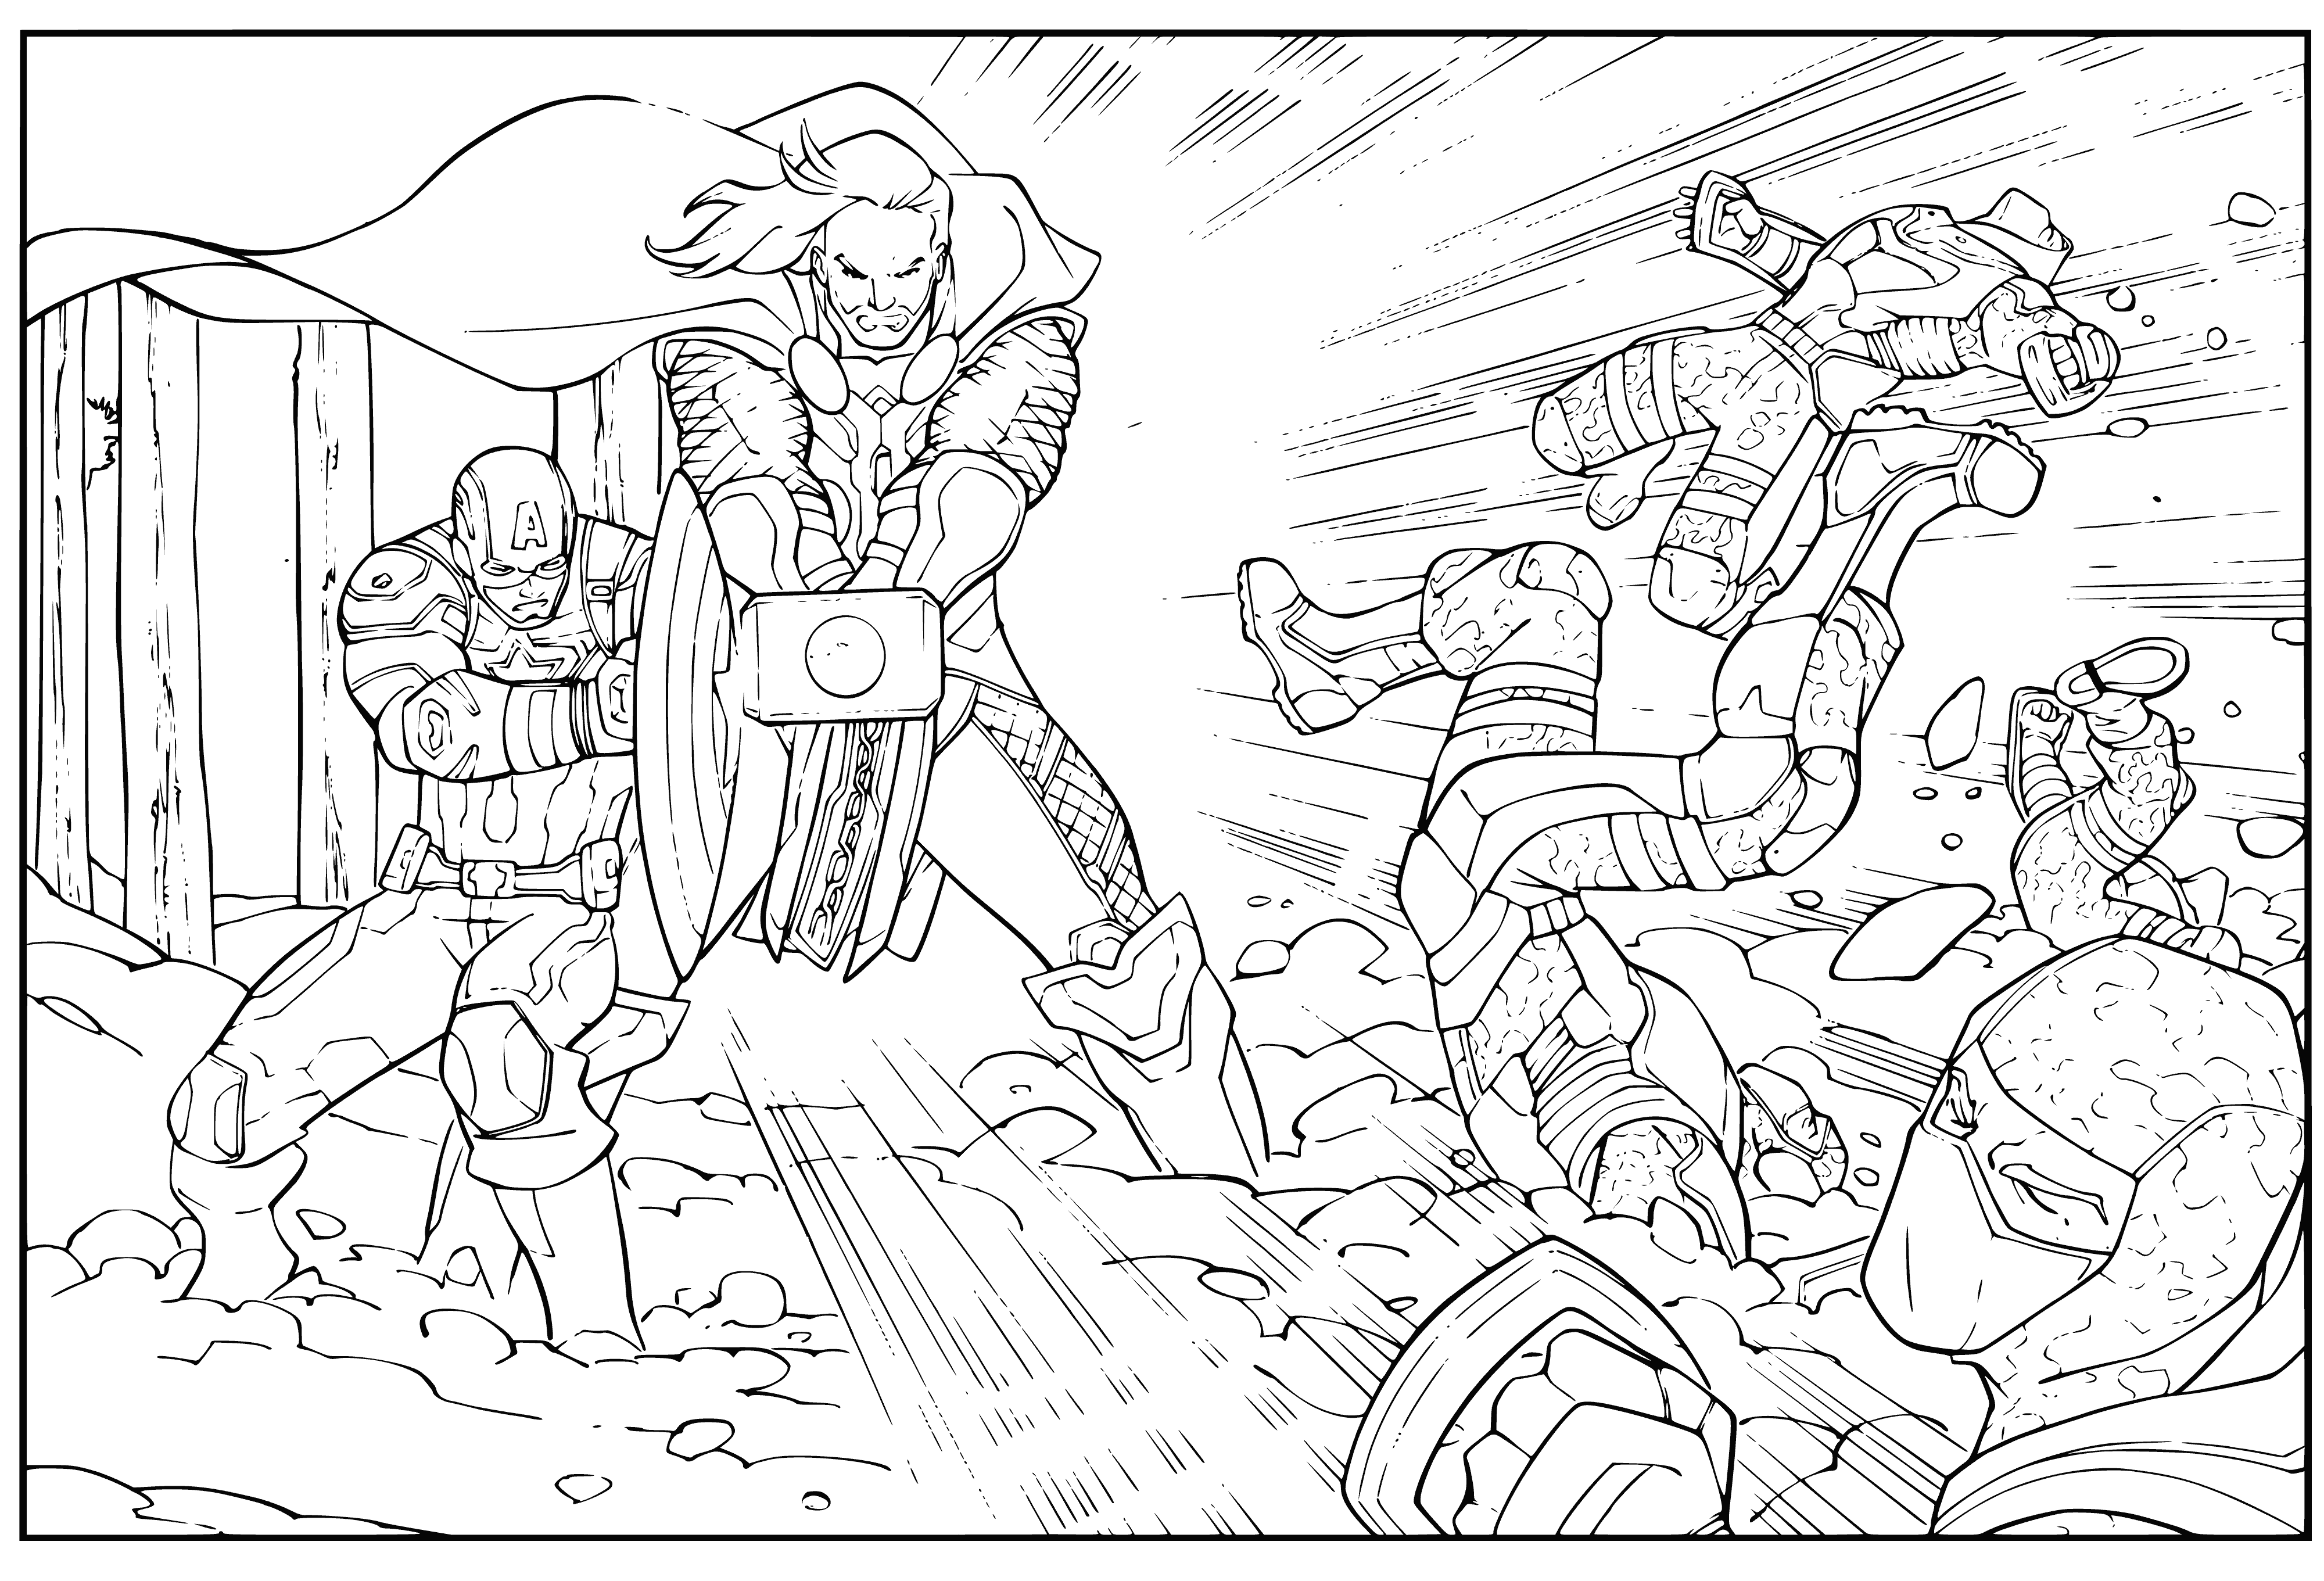 Blast wave coloring page